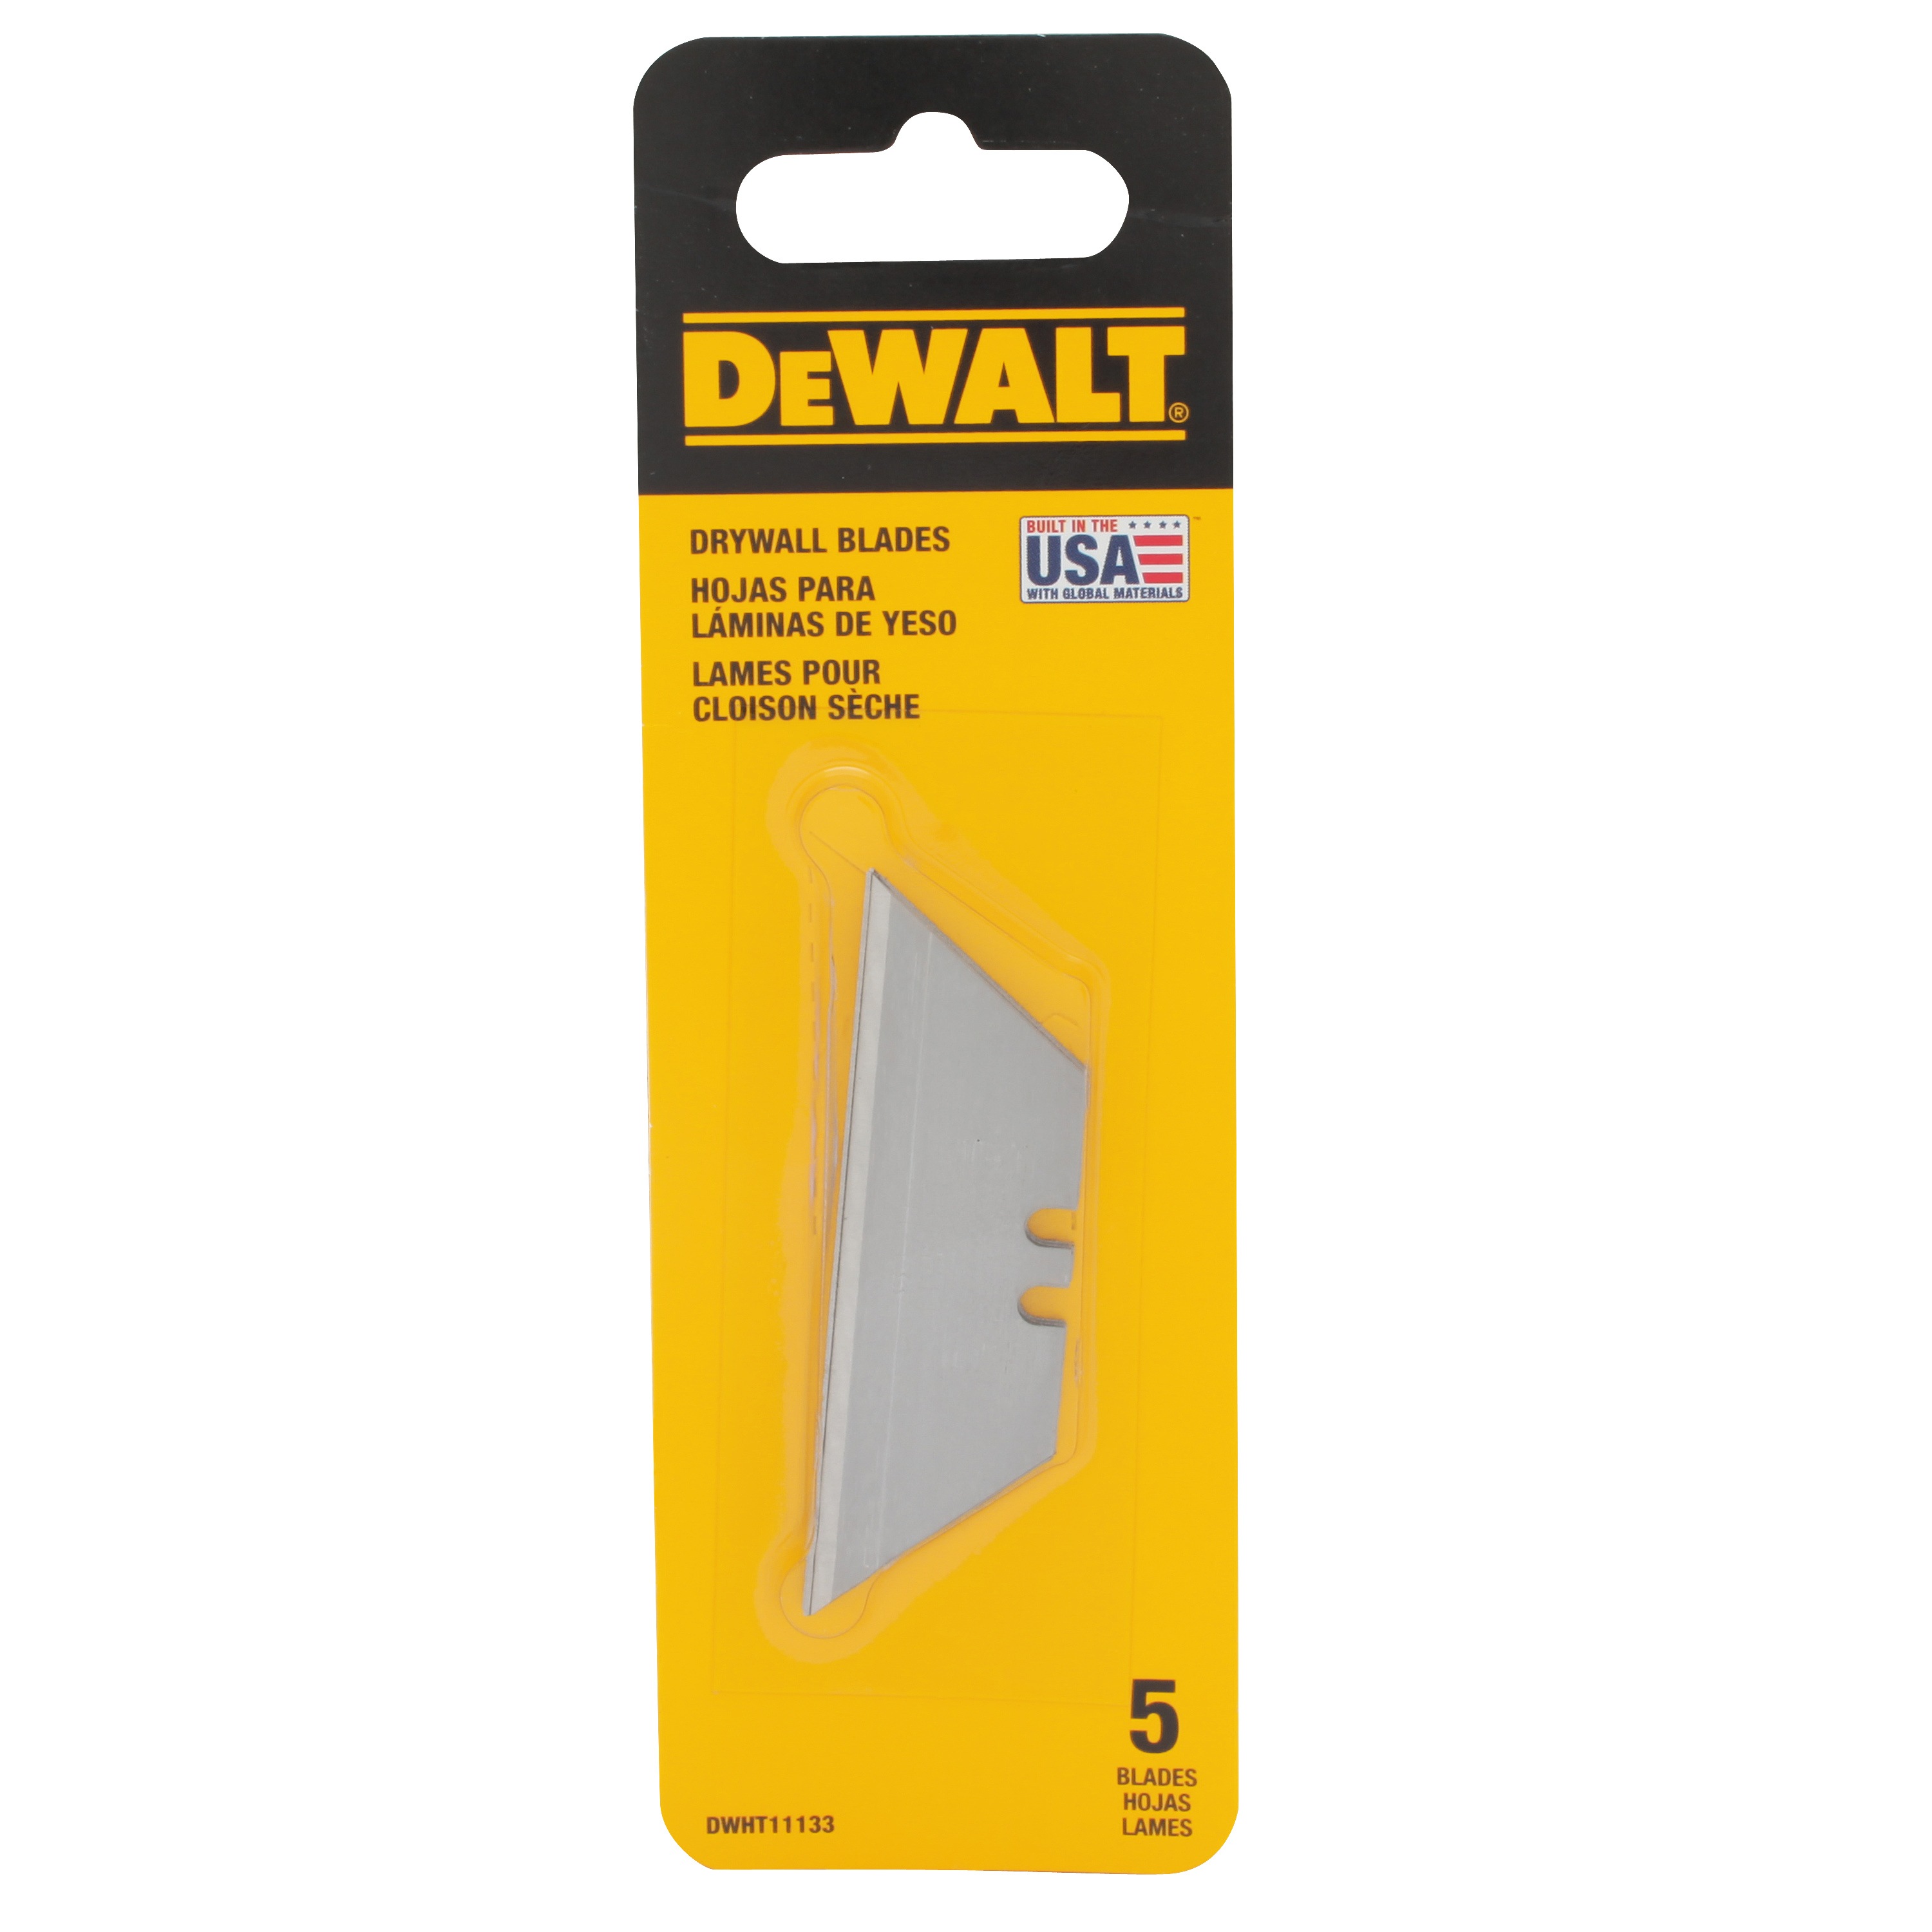 Drywall Utility Blades 5 Pack in carded packaging. 